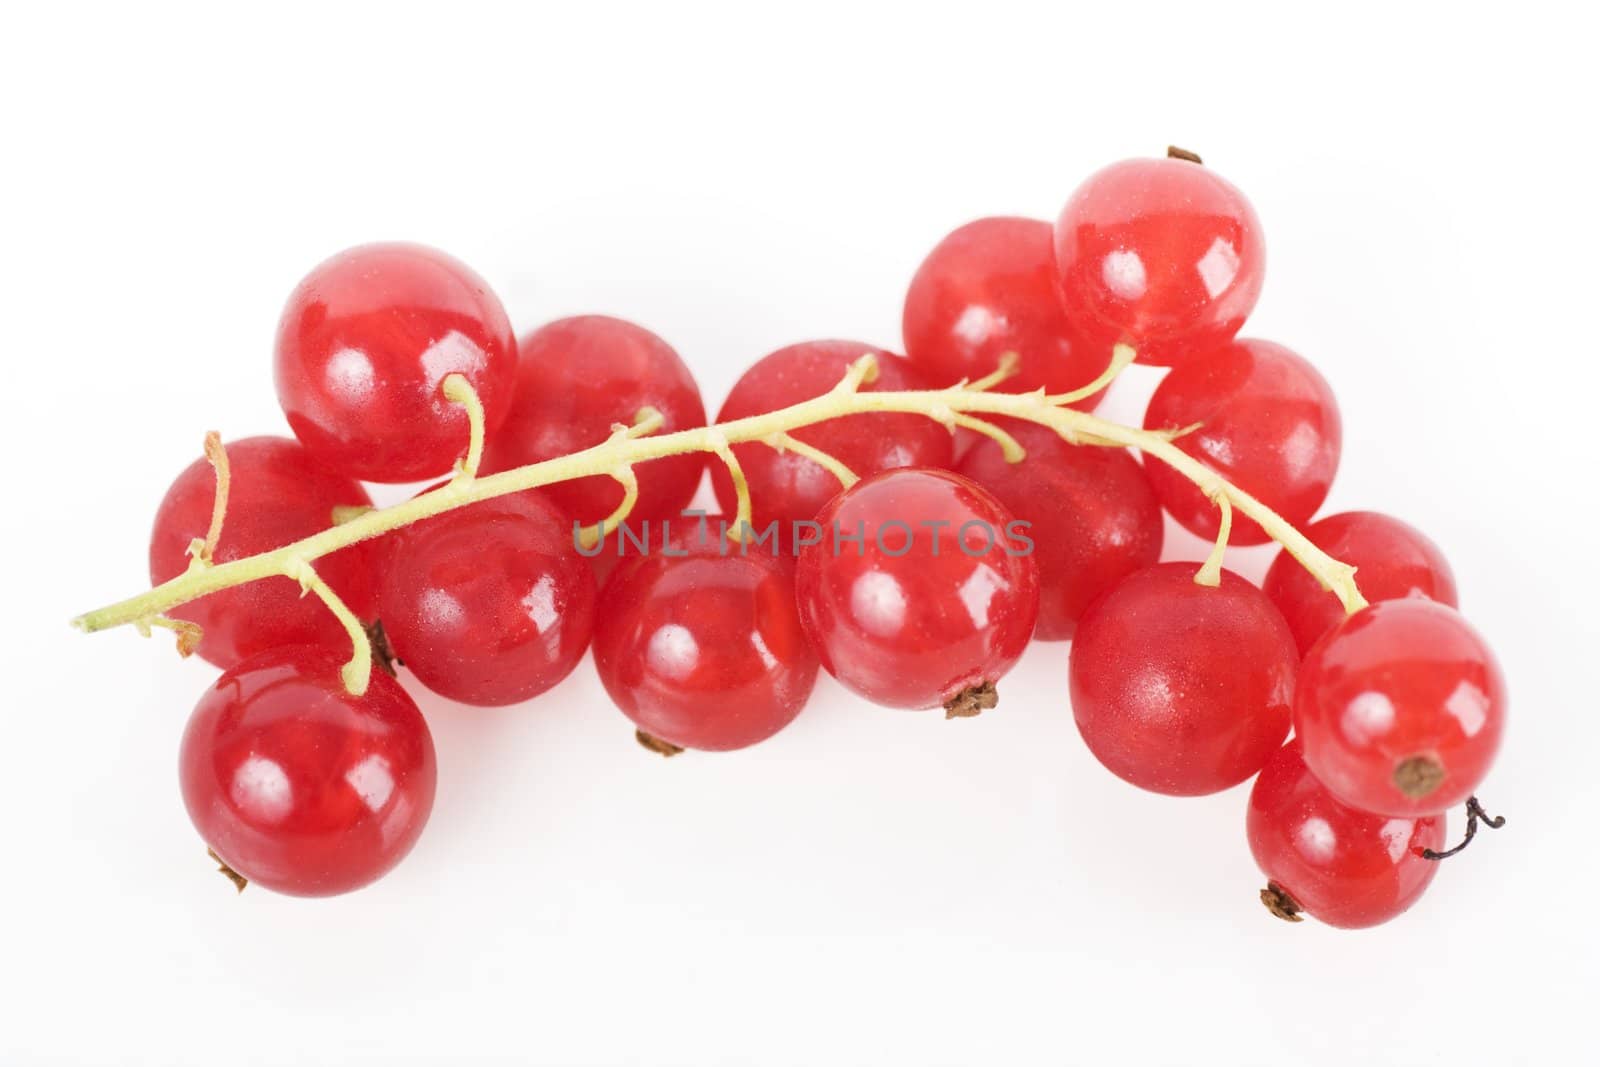 Red Currants isolated on white background.